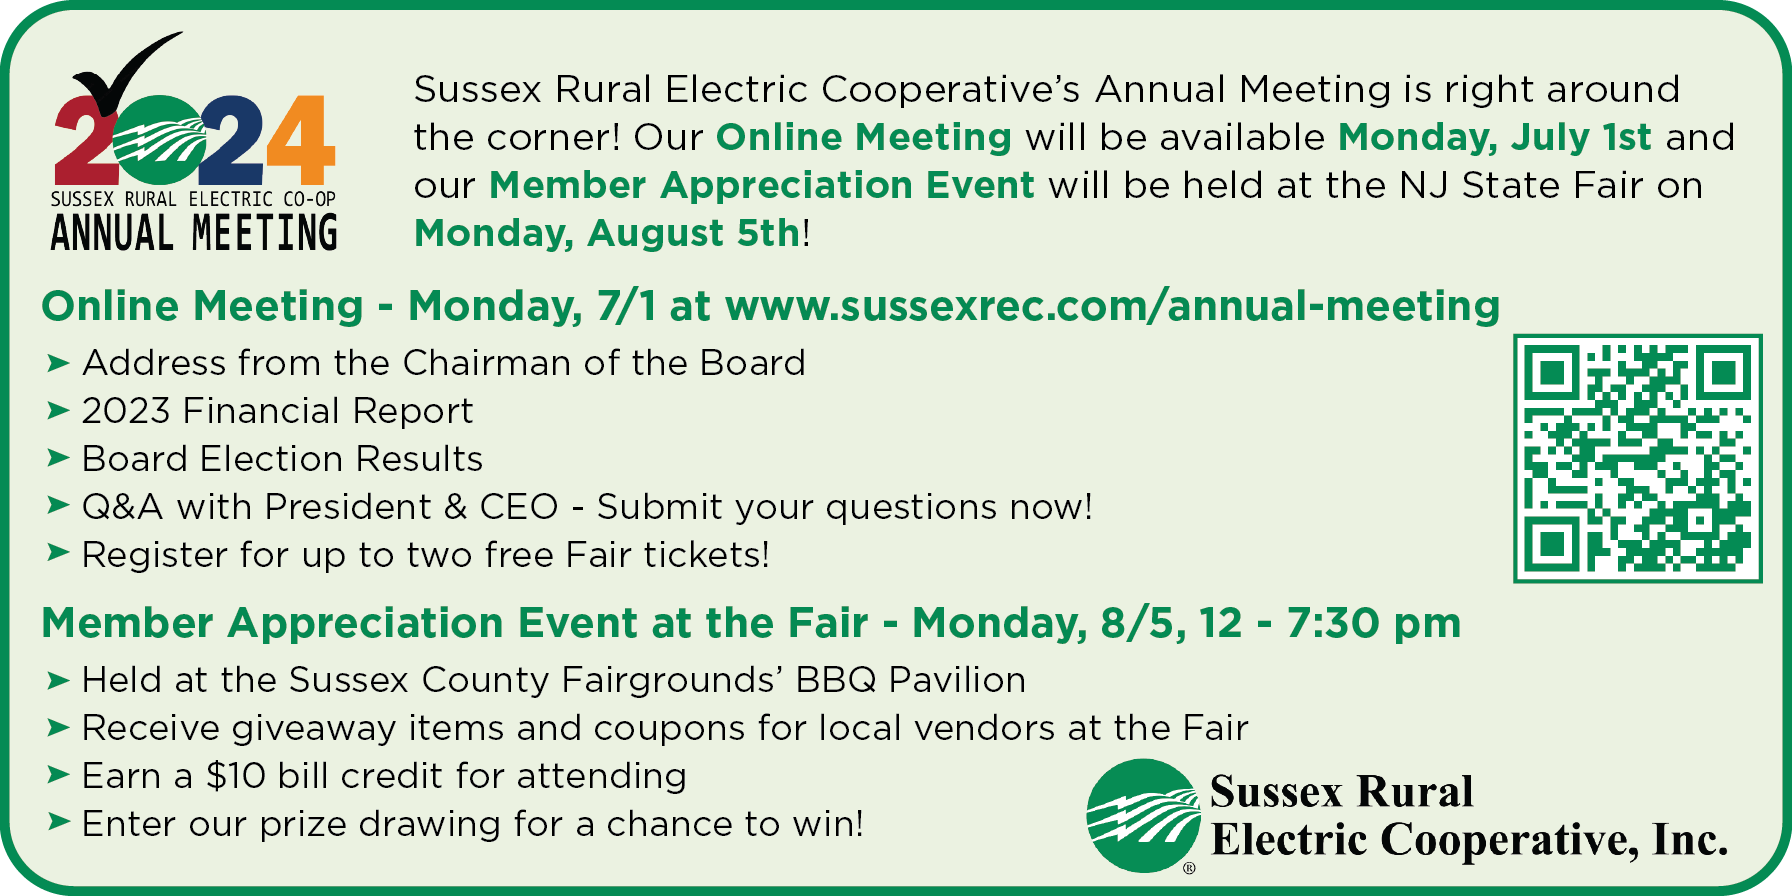 Sussex Rural Electric Cooperative's Annual Meeting is right around the corner! Our Online Meeting will be available Monday, July 1st and our Member Appreciation Event will be held at the NJ State Fair on Monday, August 5th! Online Meeting - Monday, 7/1 at www.sussexrec.com/annual-meeting: -Address from Chairman of the Board -2023 Financial Report -Board Election Results -Q&A with President & CEO - Submit your questions now! -Register for up to two free Fair tickets! Member Appreciation Event at the Fair - Monday, 8/5, 12 - 7:30 pm: -Held at the Sussex County Fairgrounds' BBQ Pavilion -Receive giveaway items and coupons for local vendors at the Fair -Earn a $10 bill credit for attending -Enter our prize drawing for a chance to win! - Sussex Rural Electric Cooperative, Inc.